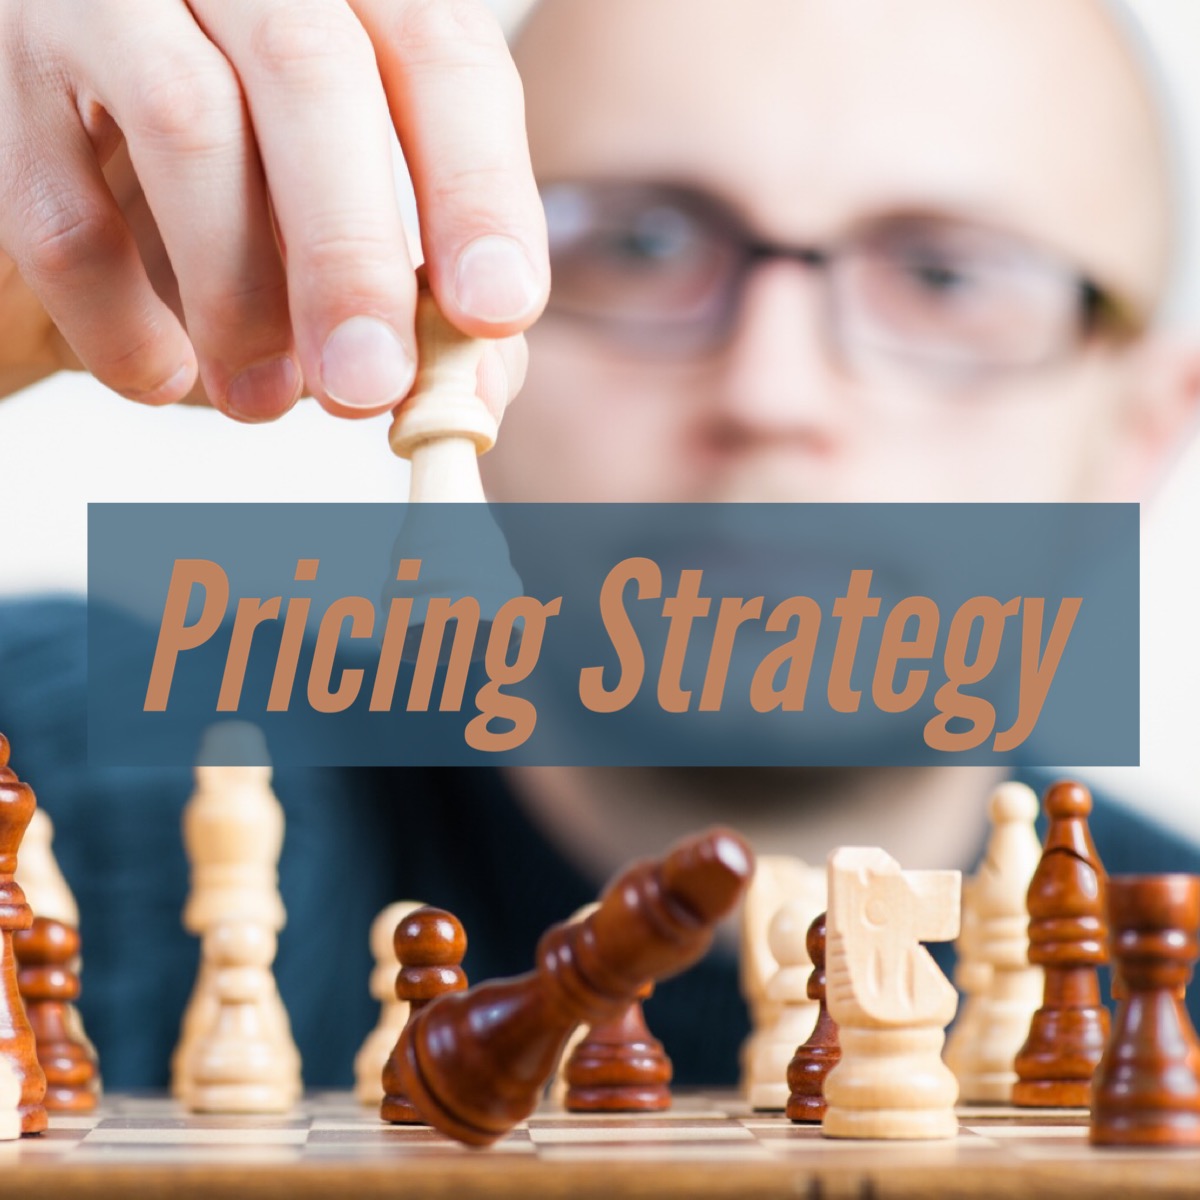 Commandments of Pricing Strategy